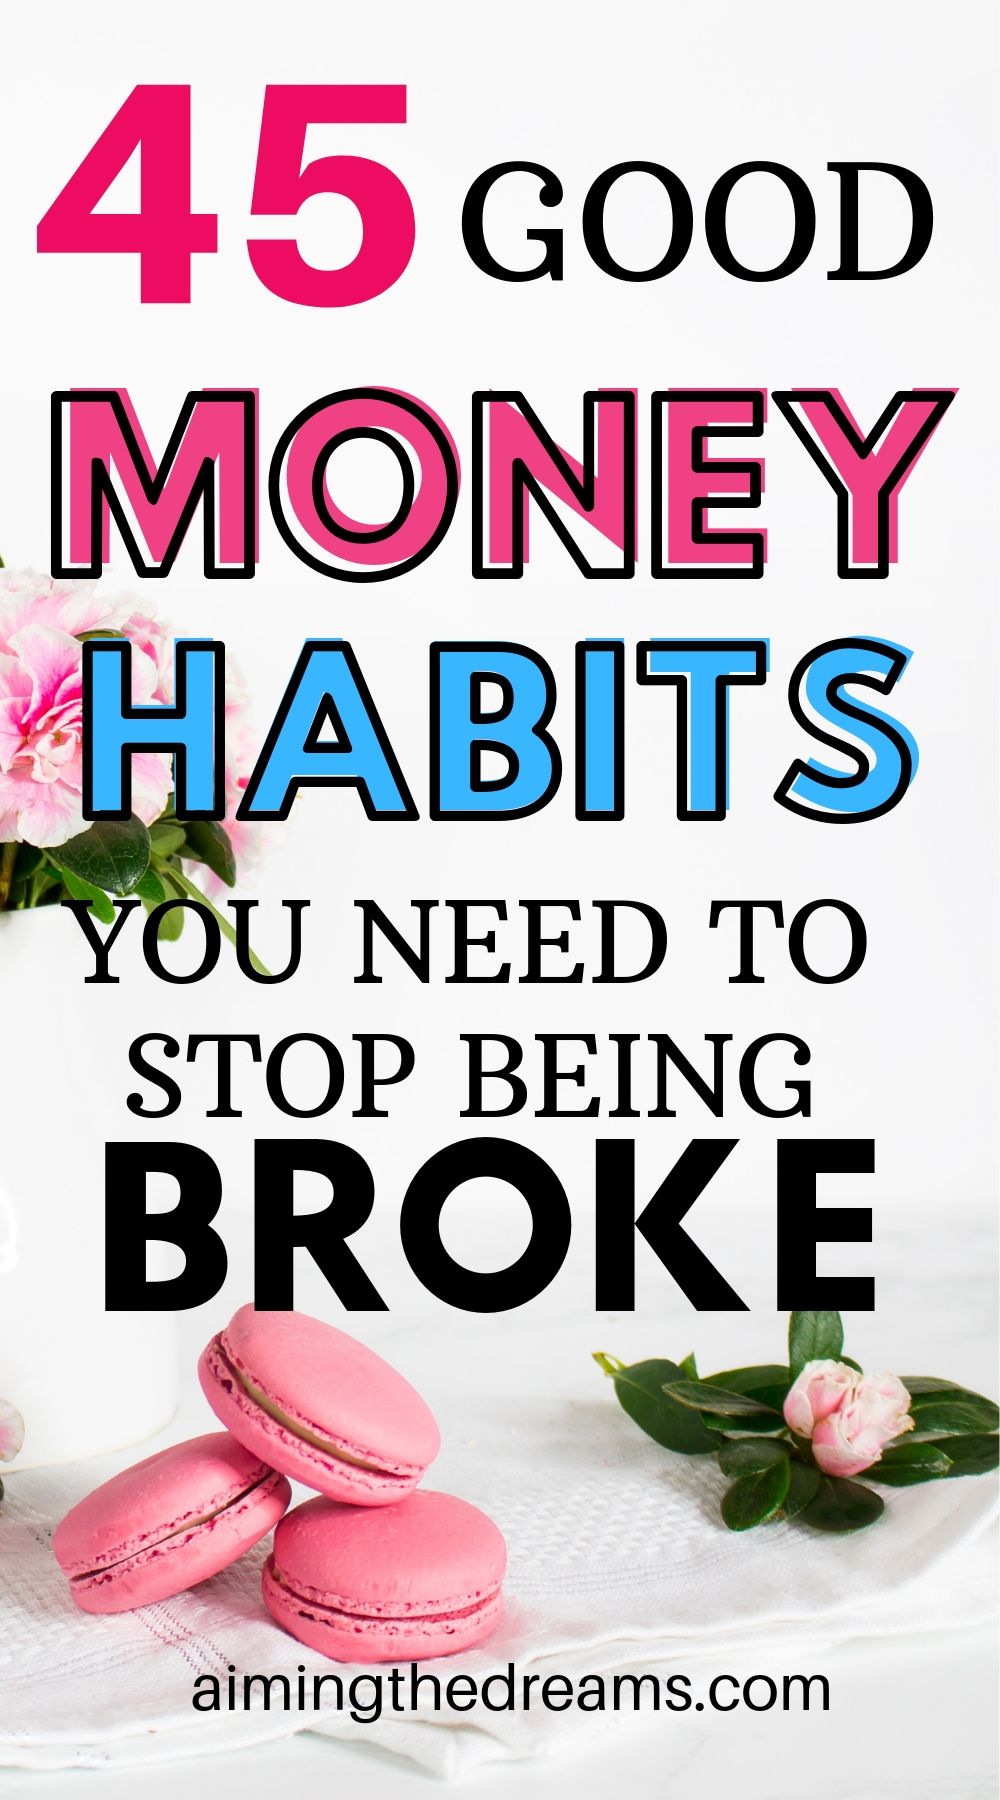 45 good money habits that make huge difference